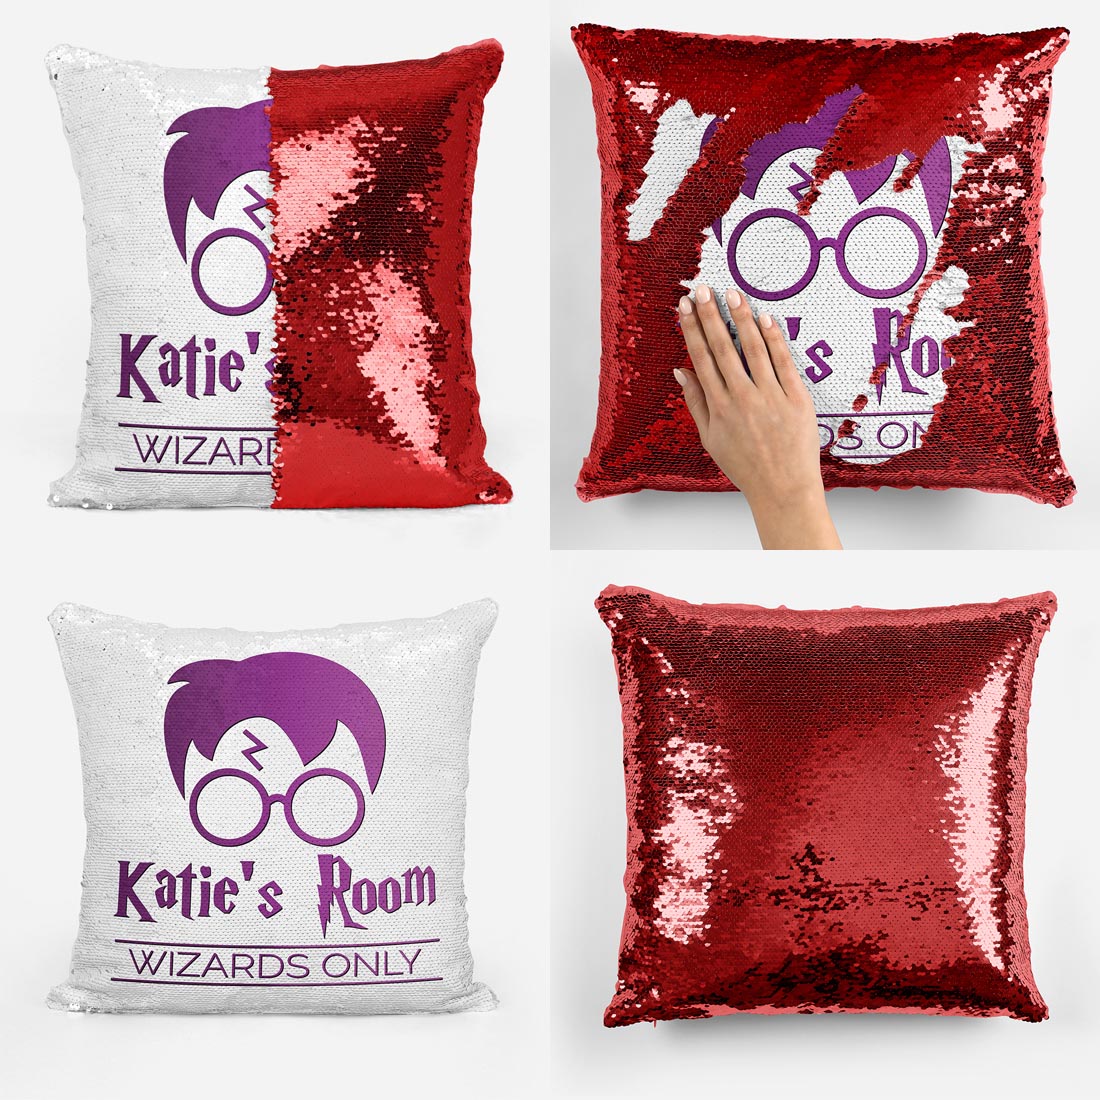 Personalised Wizards Only - Reveal Pillow Cushion